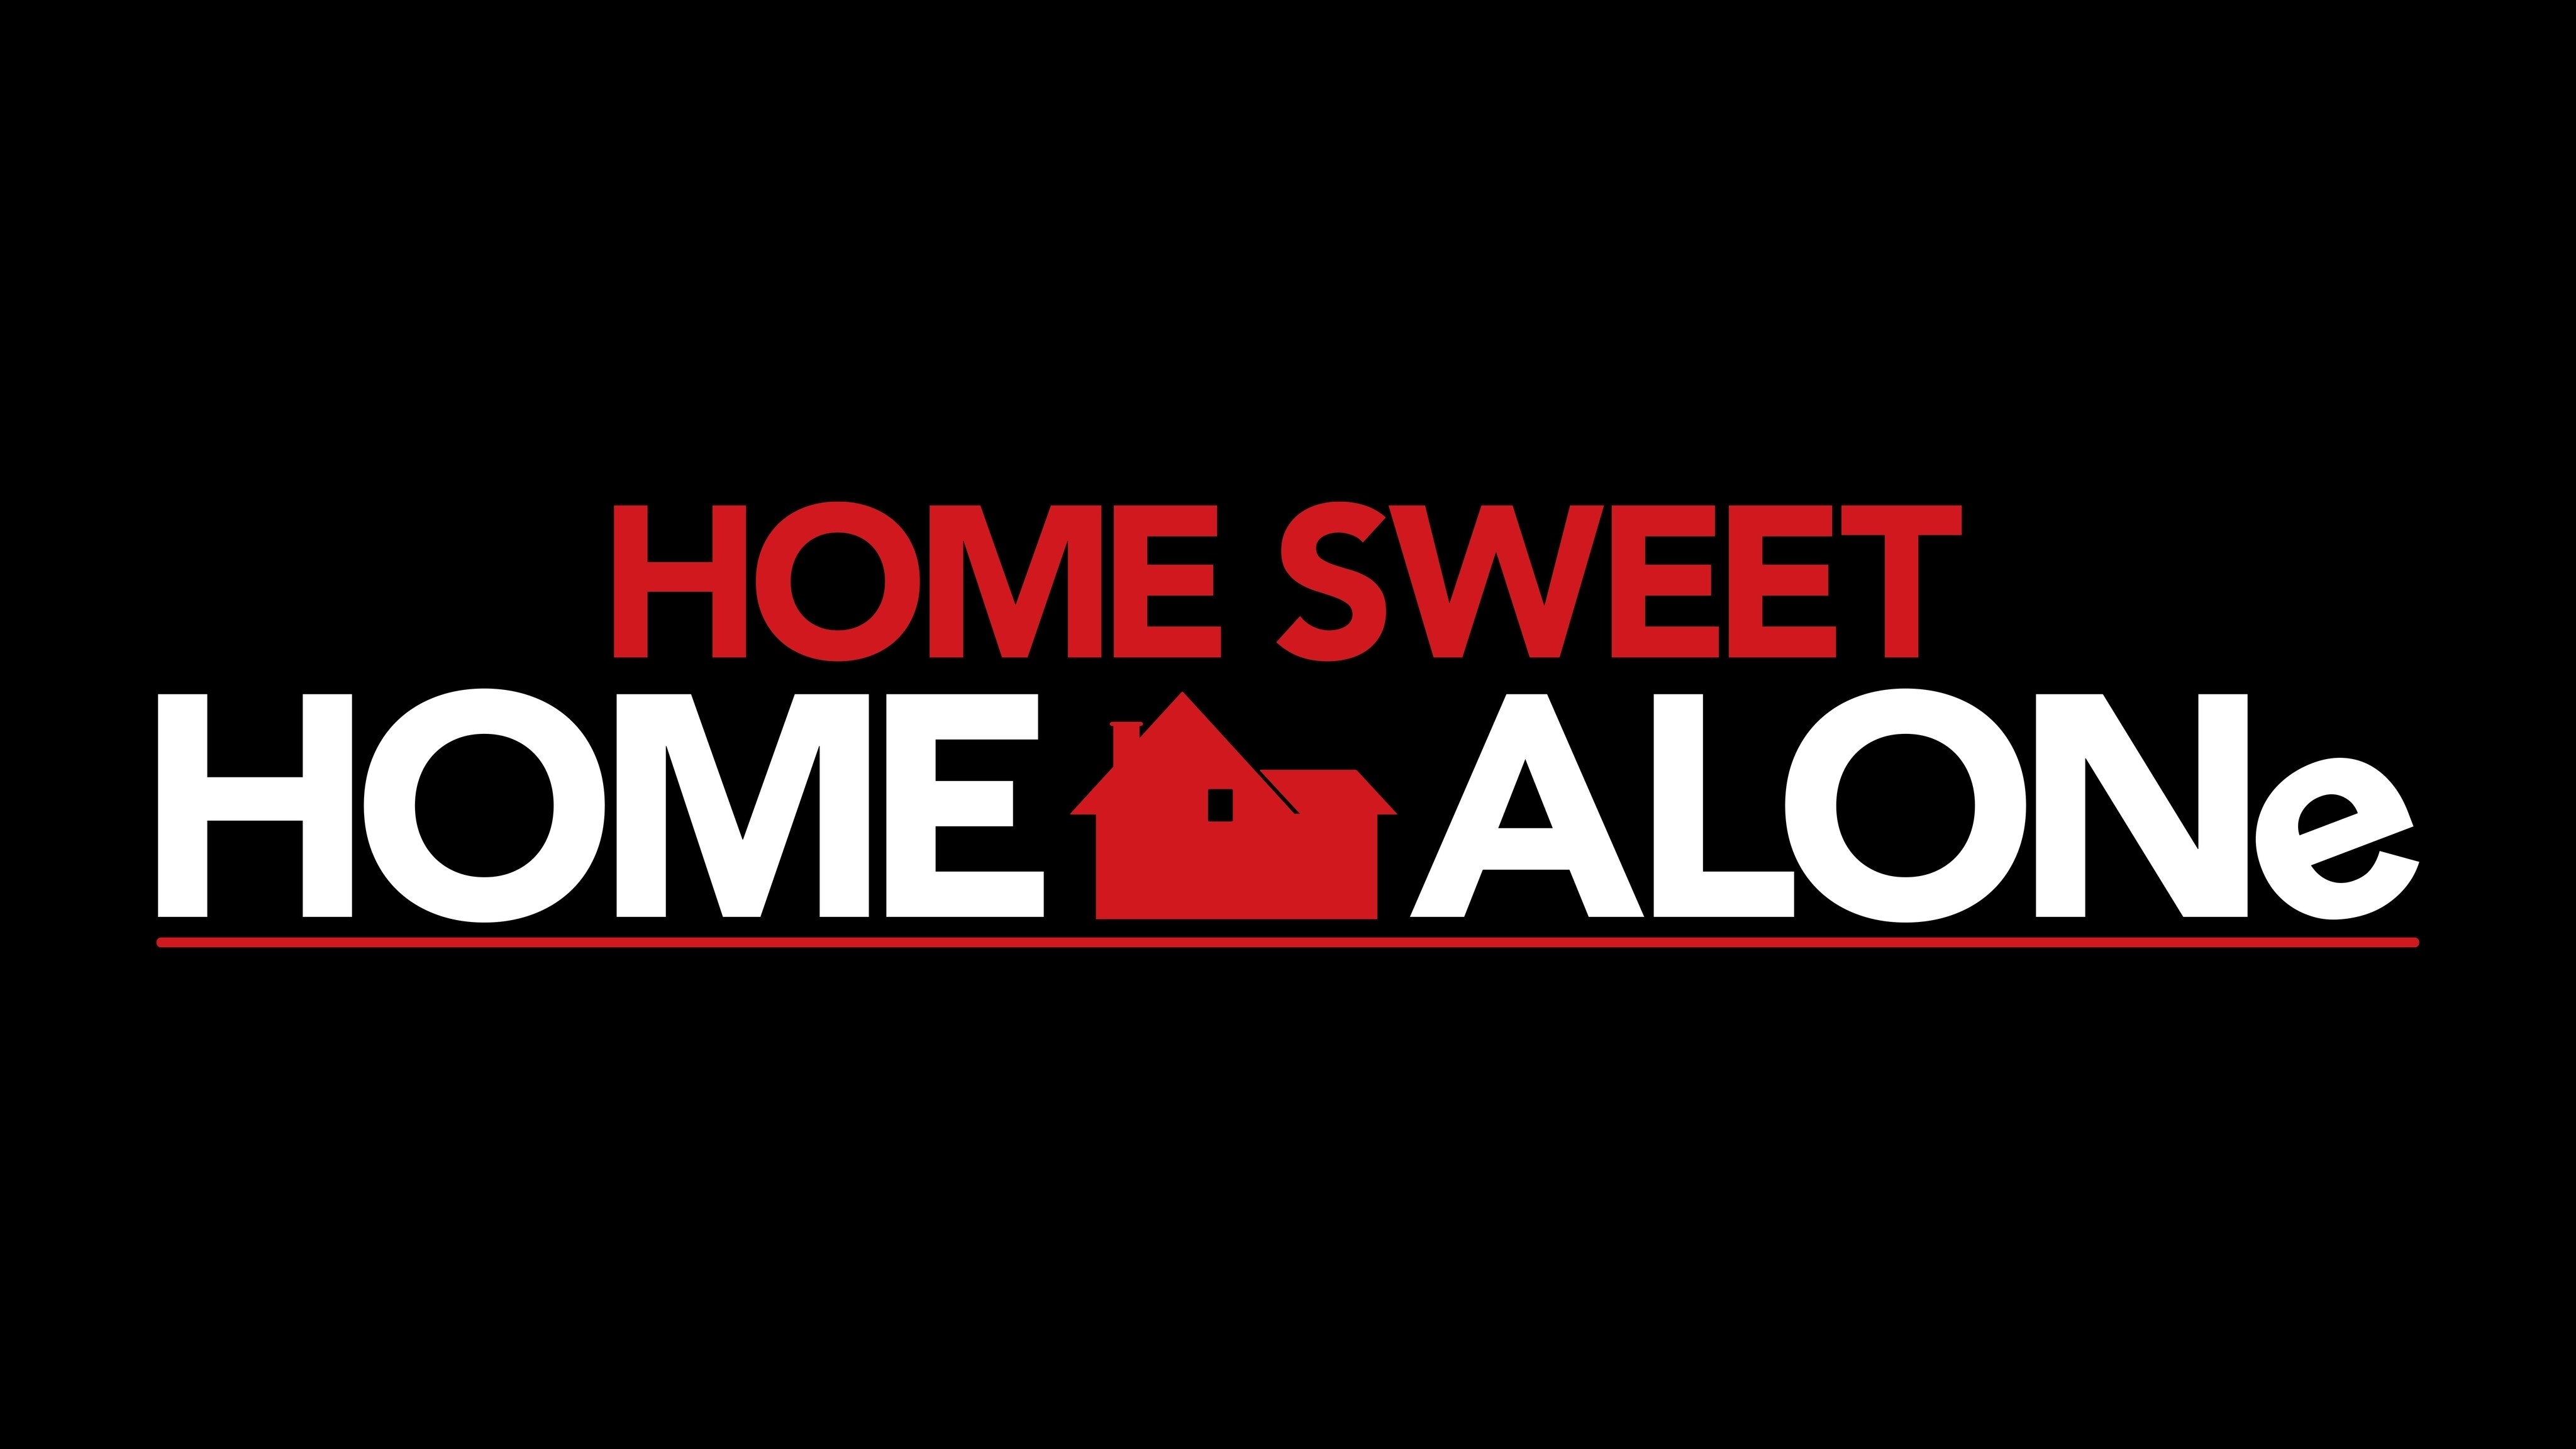 DISNEY+ RELEASES FIRST TRAILER FOR ALL-NEW ADVENTURE COMEDY “HOME SWEET HOME ALONE” PREMIERING ON DISNEY+ DAY